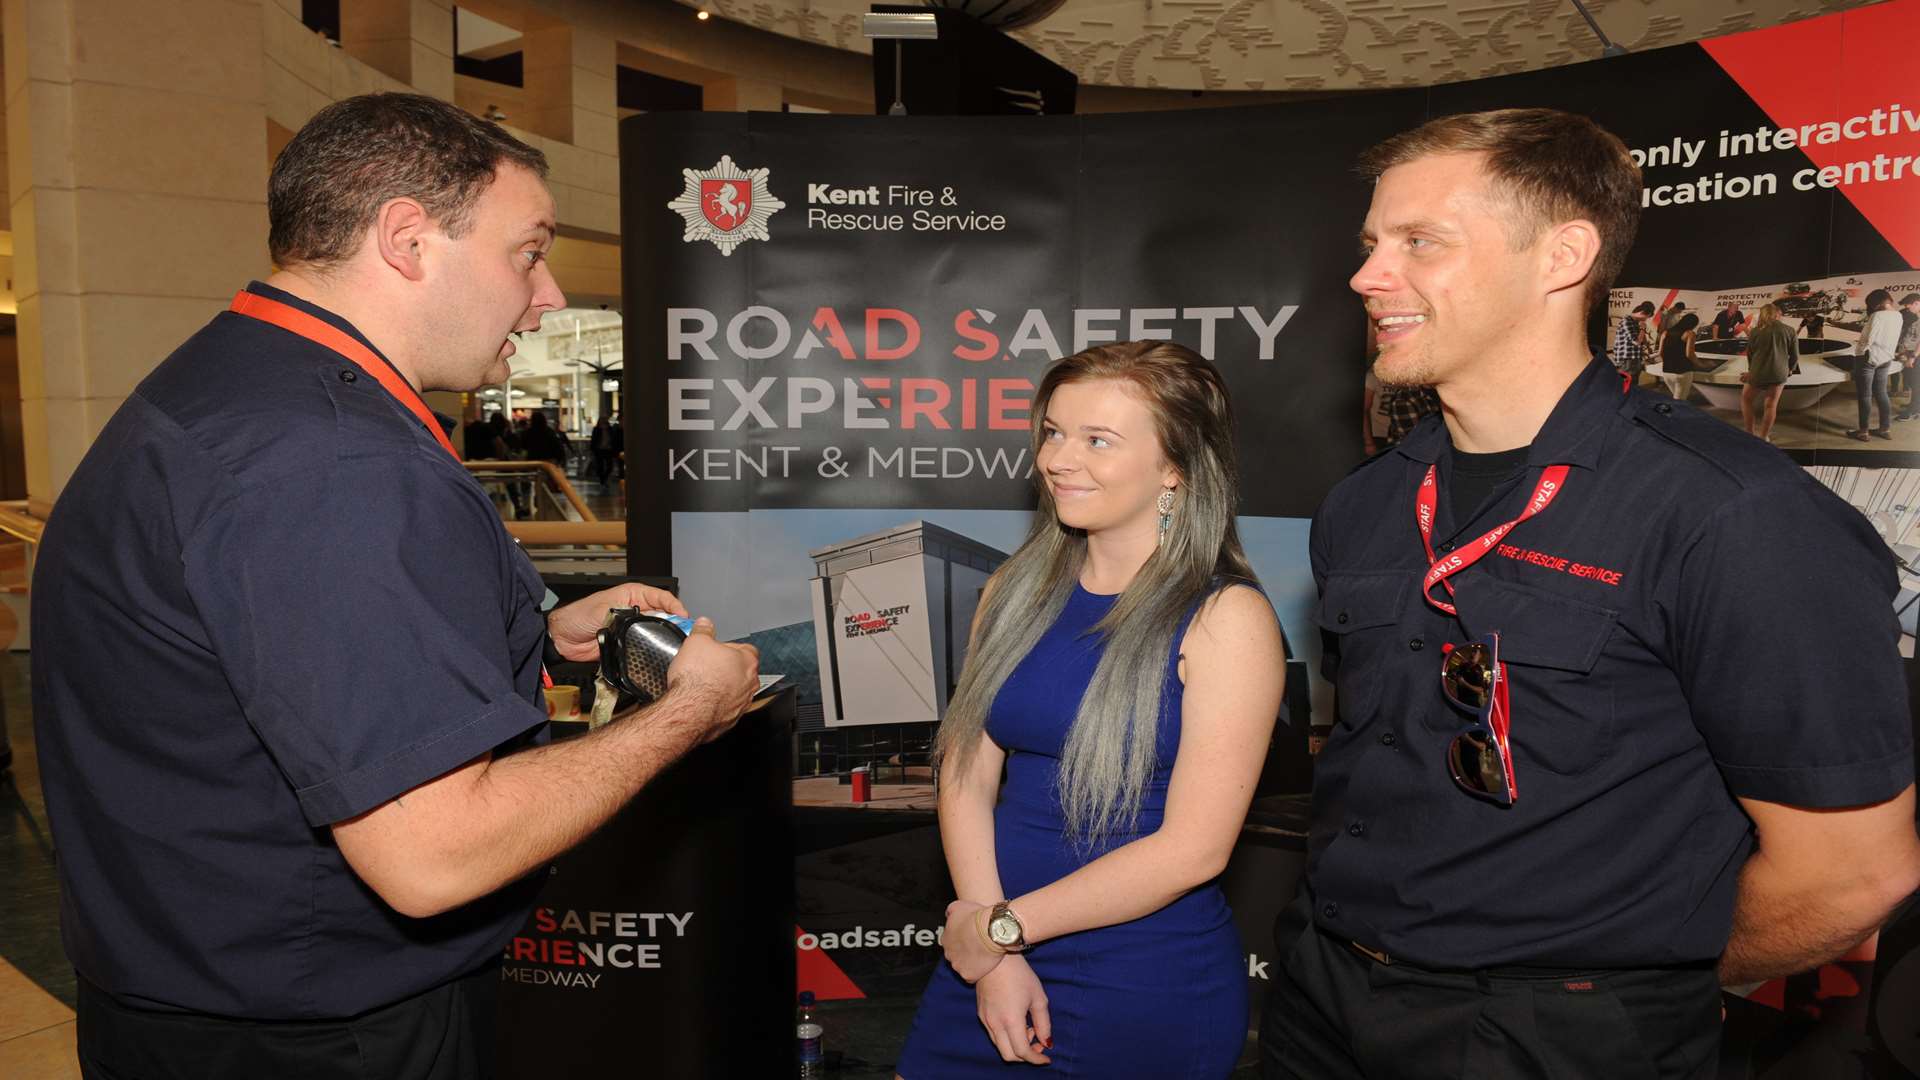 KFRS' Daniel Morley and Mike Piper talk through the procedure with Maisie Hughes